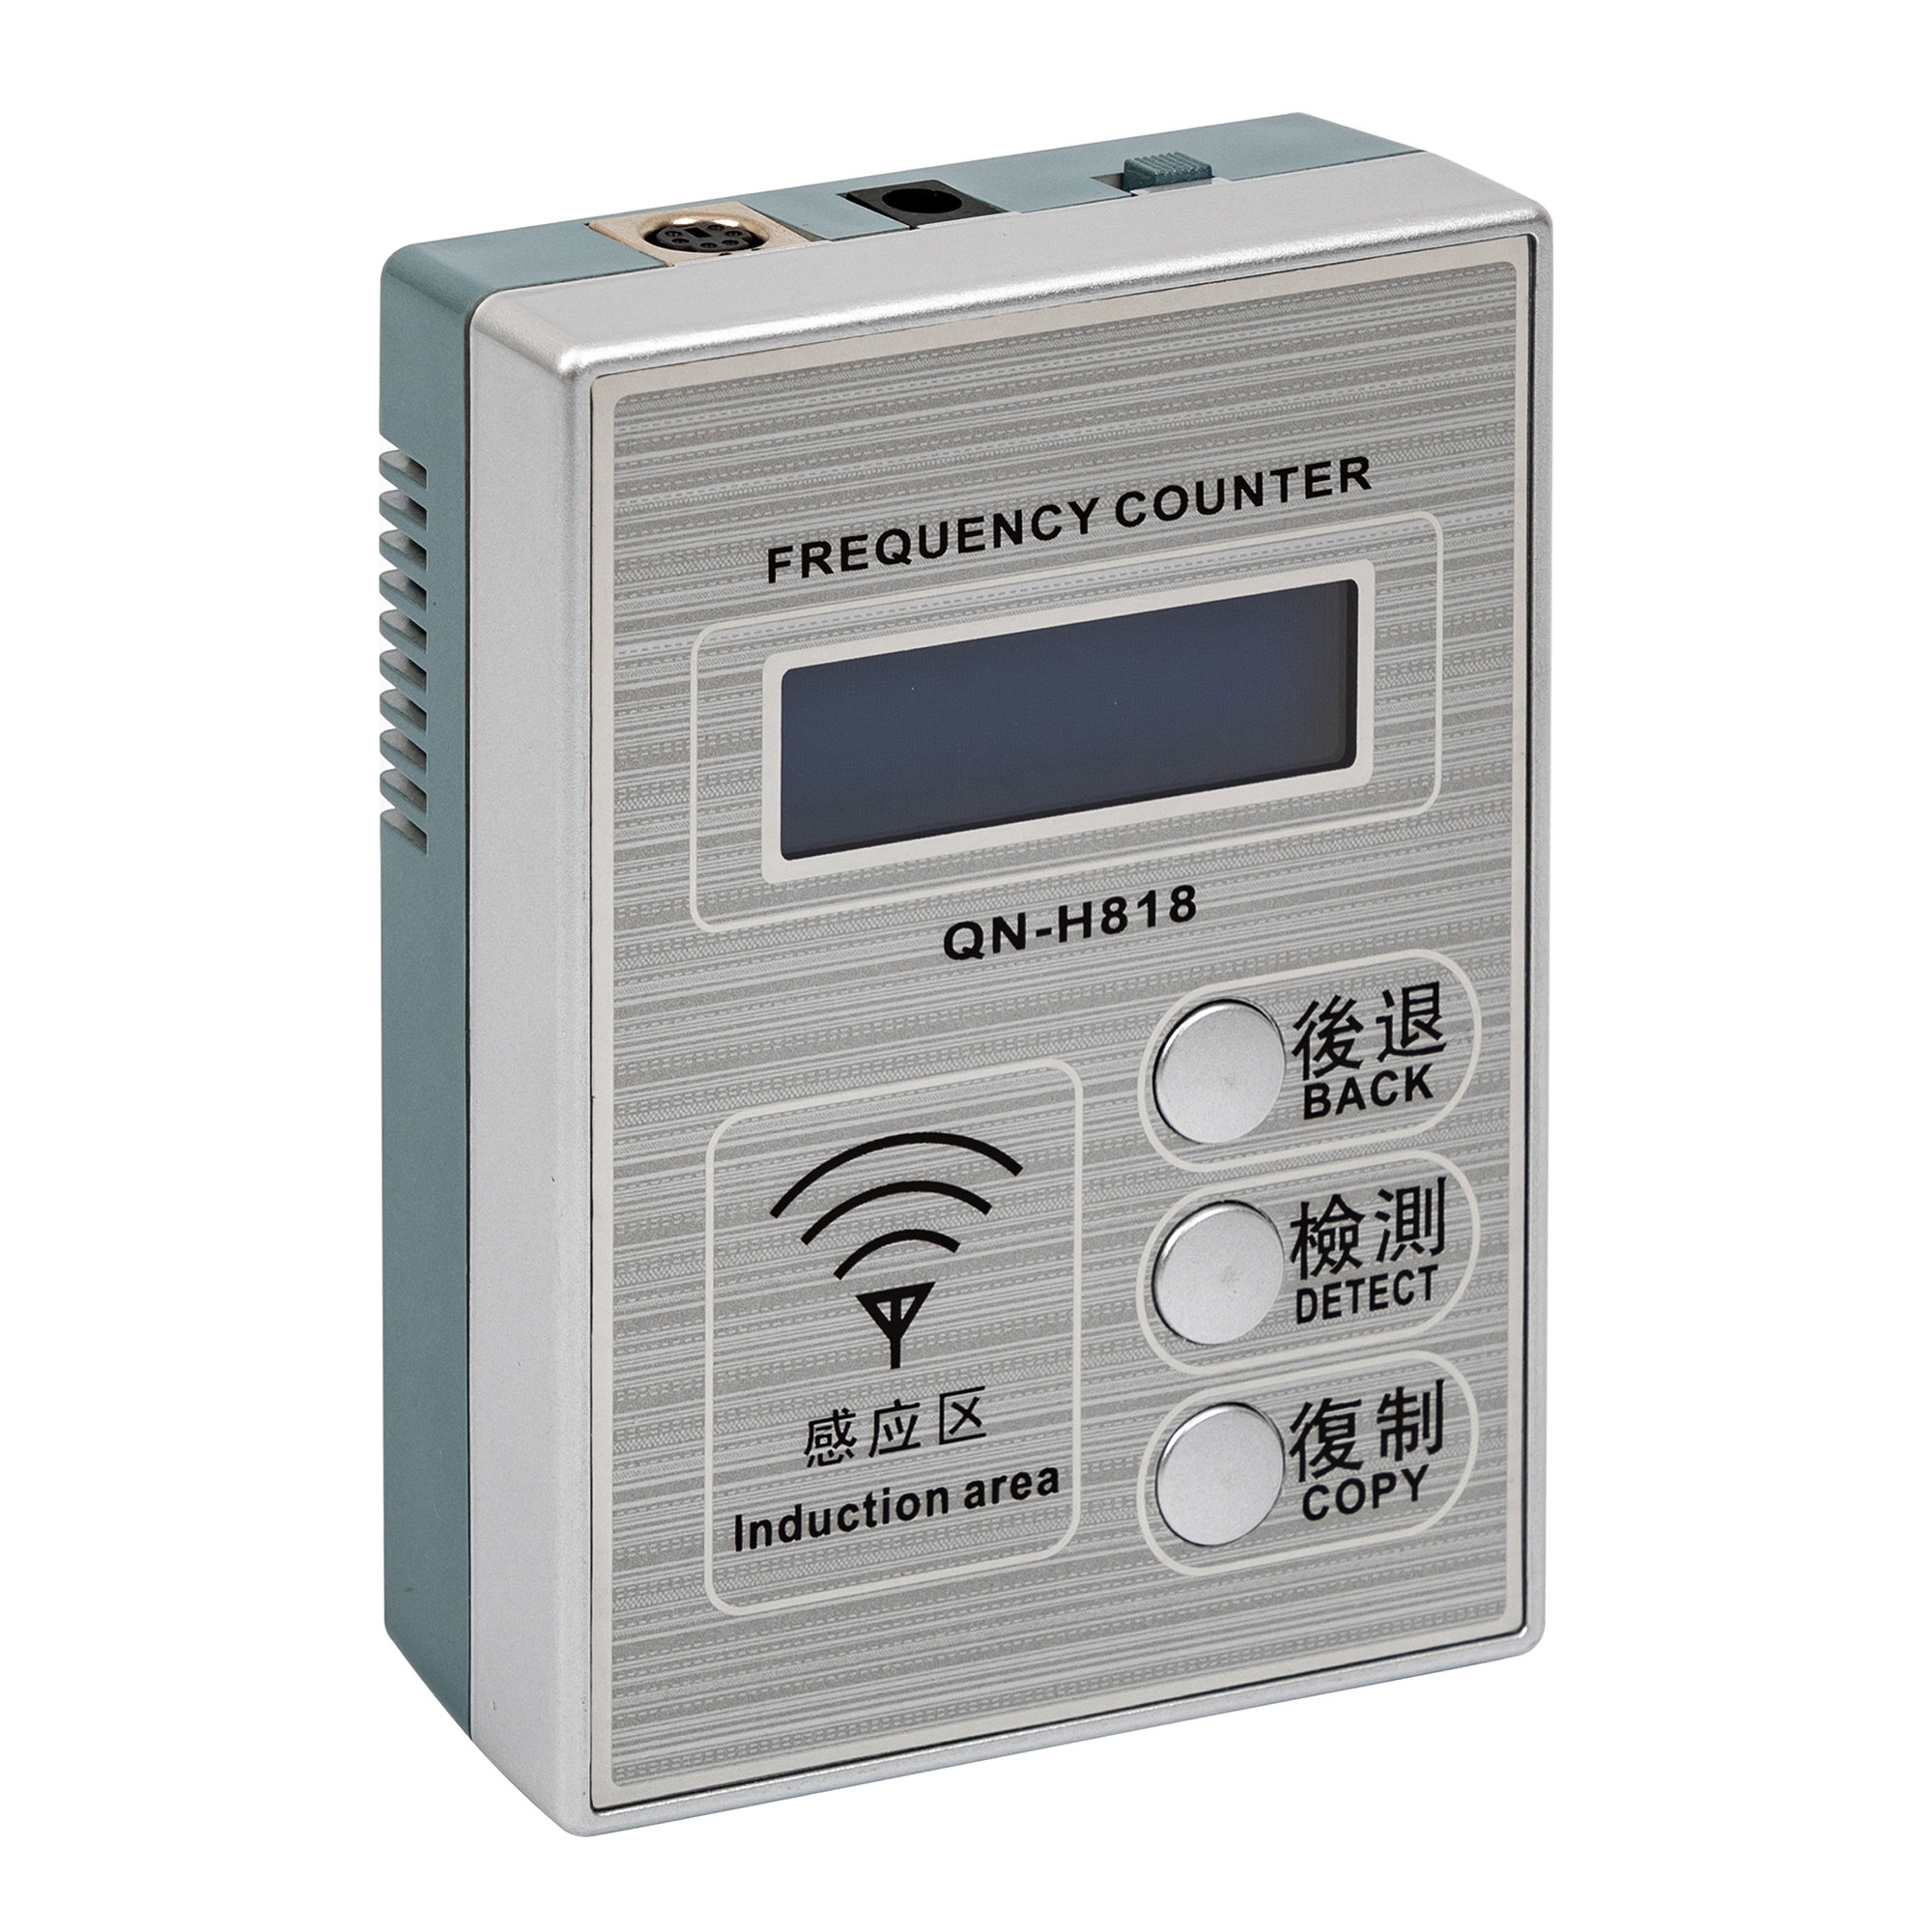 What are the different types of frequency meters available, and how do they differ in their applications?